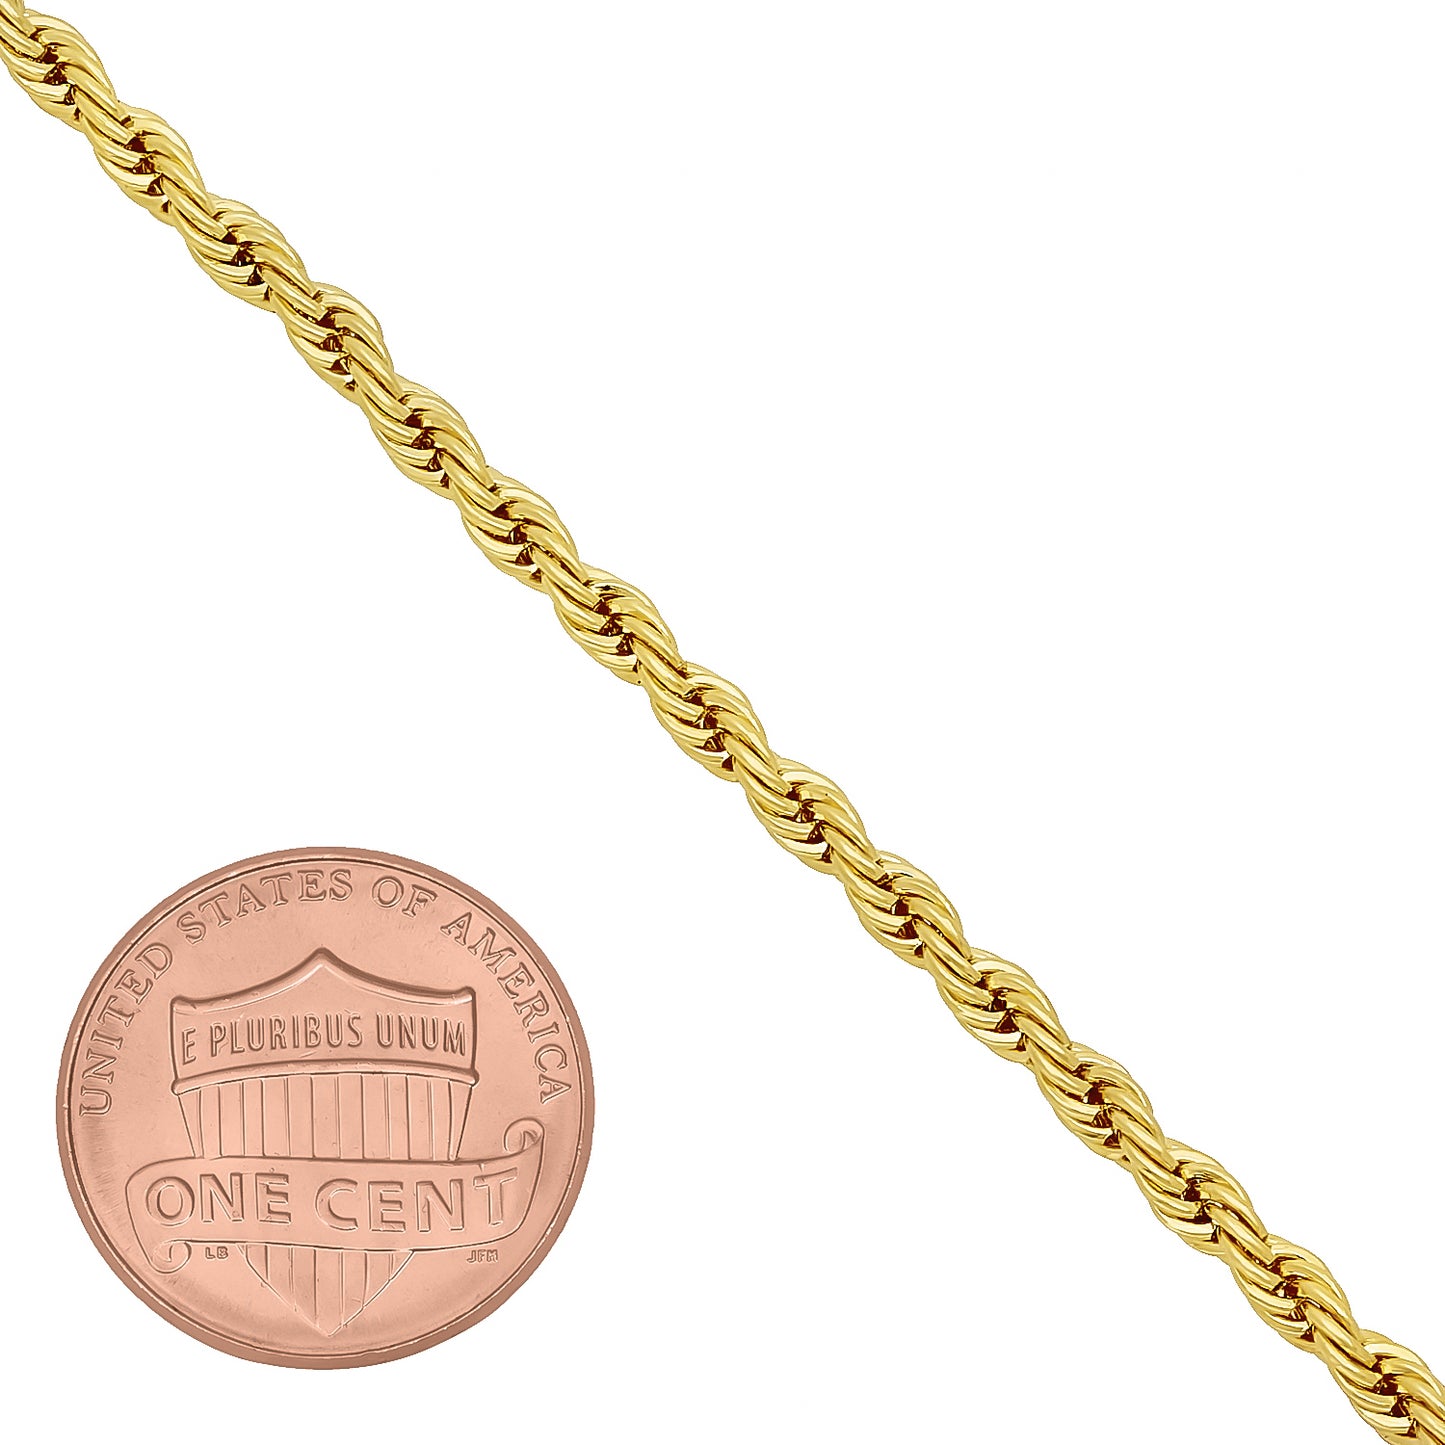 2mm-6mm 14k Gold Plated Twisted Rope Chain Bracelets 7-9" Made in USA + Jewelry Cloth & Pouch (SKU: GL-ROPE-BRACELETS)